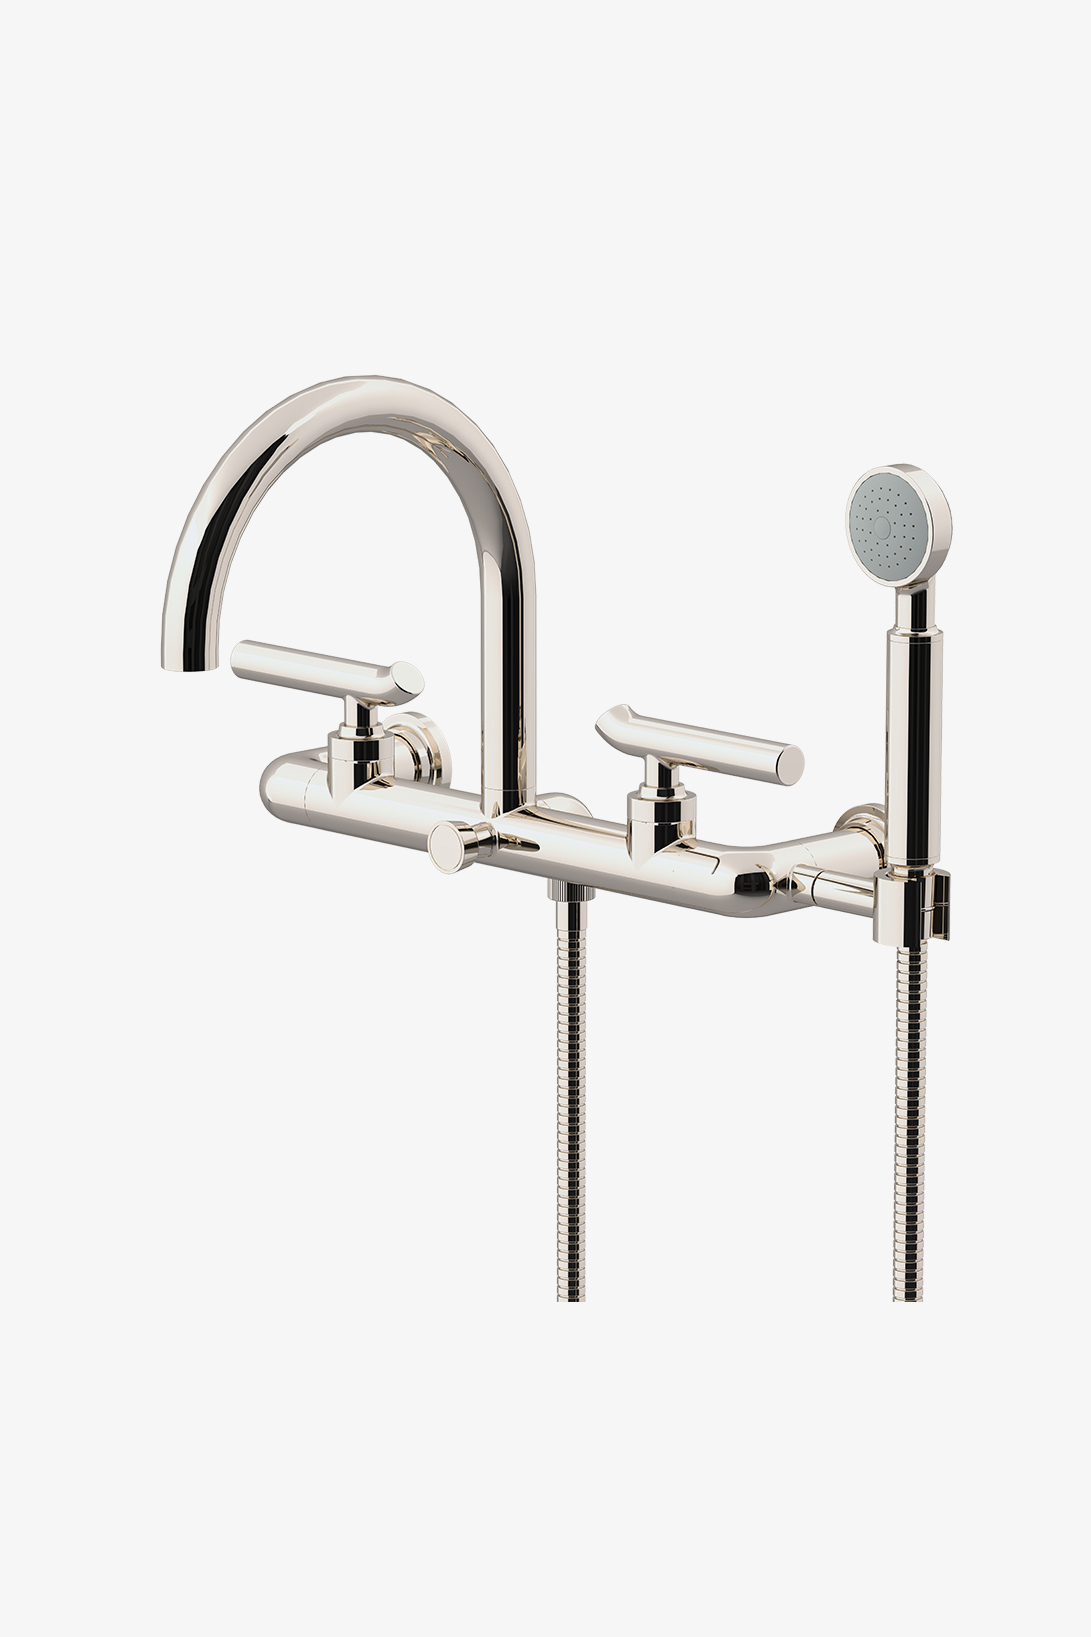 Bond Solo Wall Mounted Tub Filler